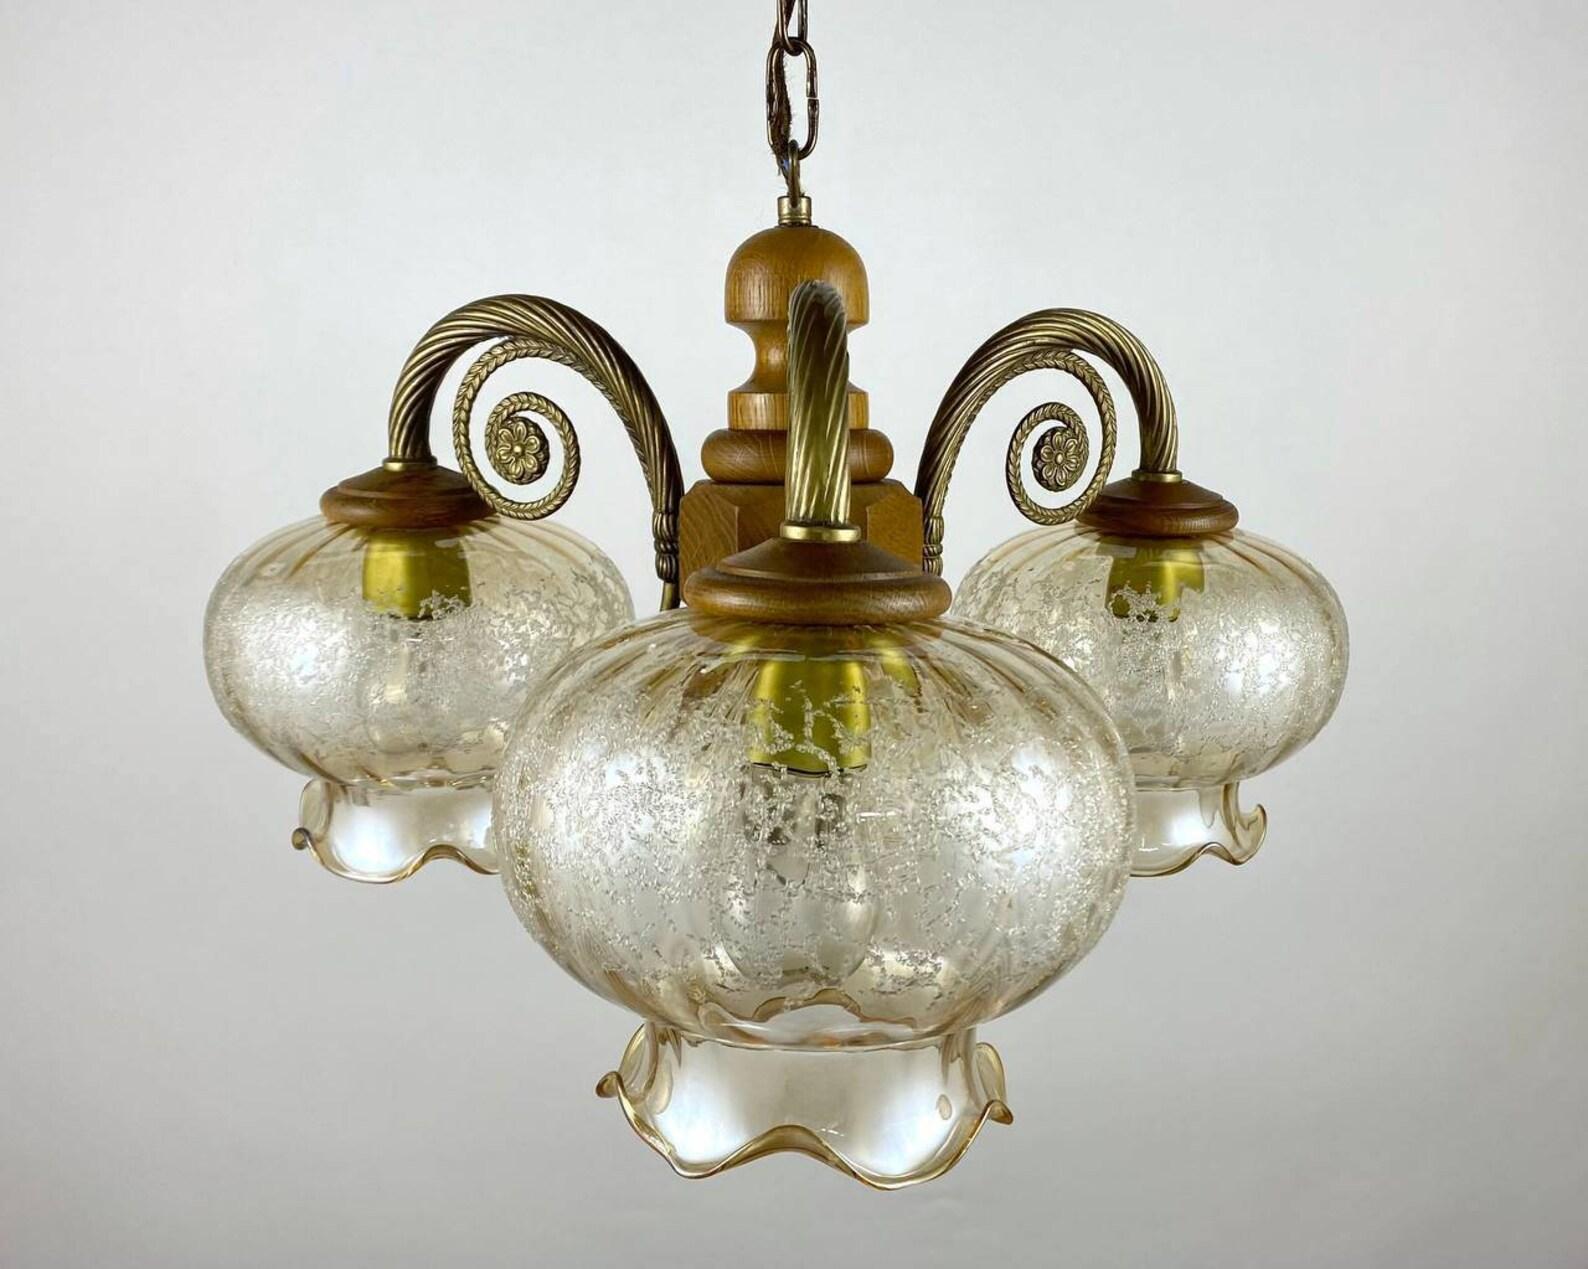 Belgian Vintage Glass Plafond Chandelier in Wooden And Brass Fittings, Belgium, 1980s